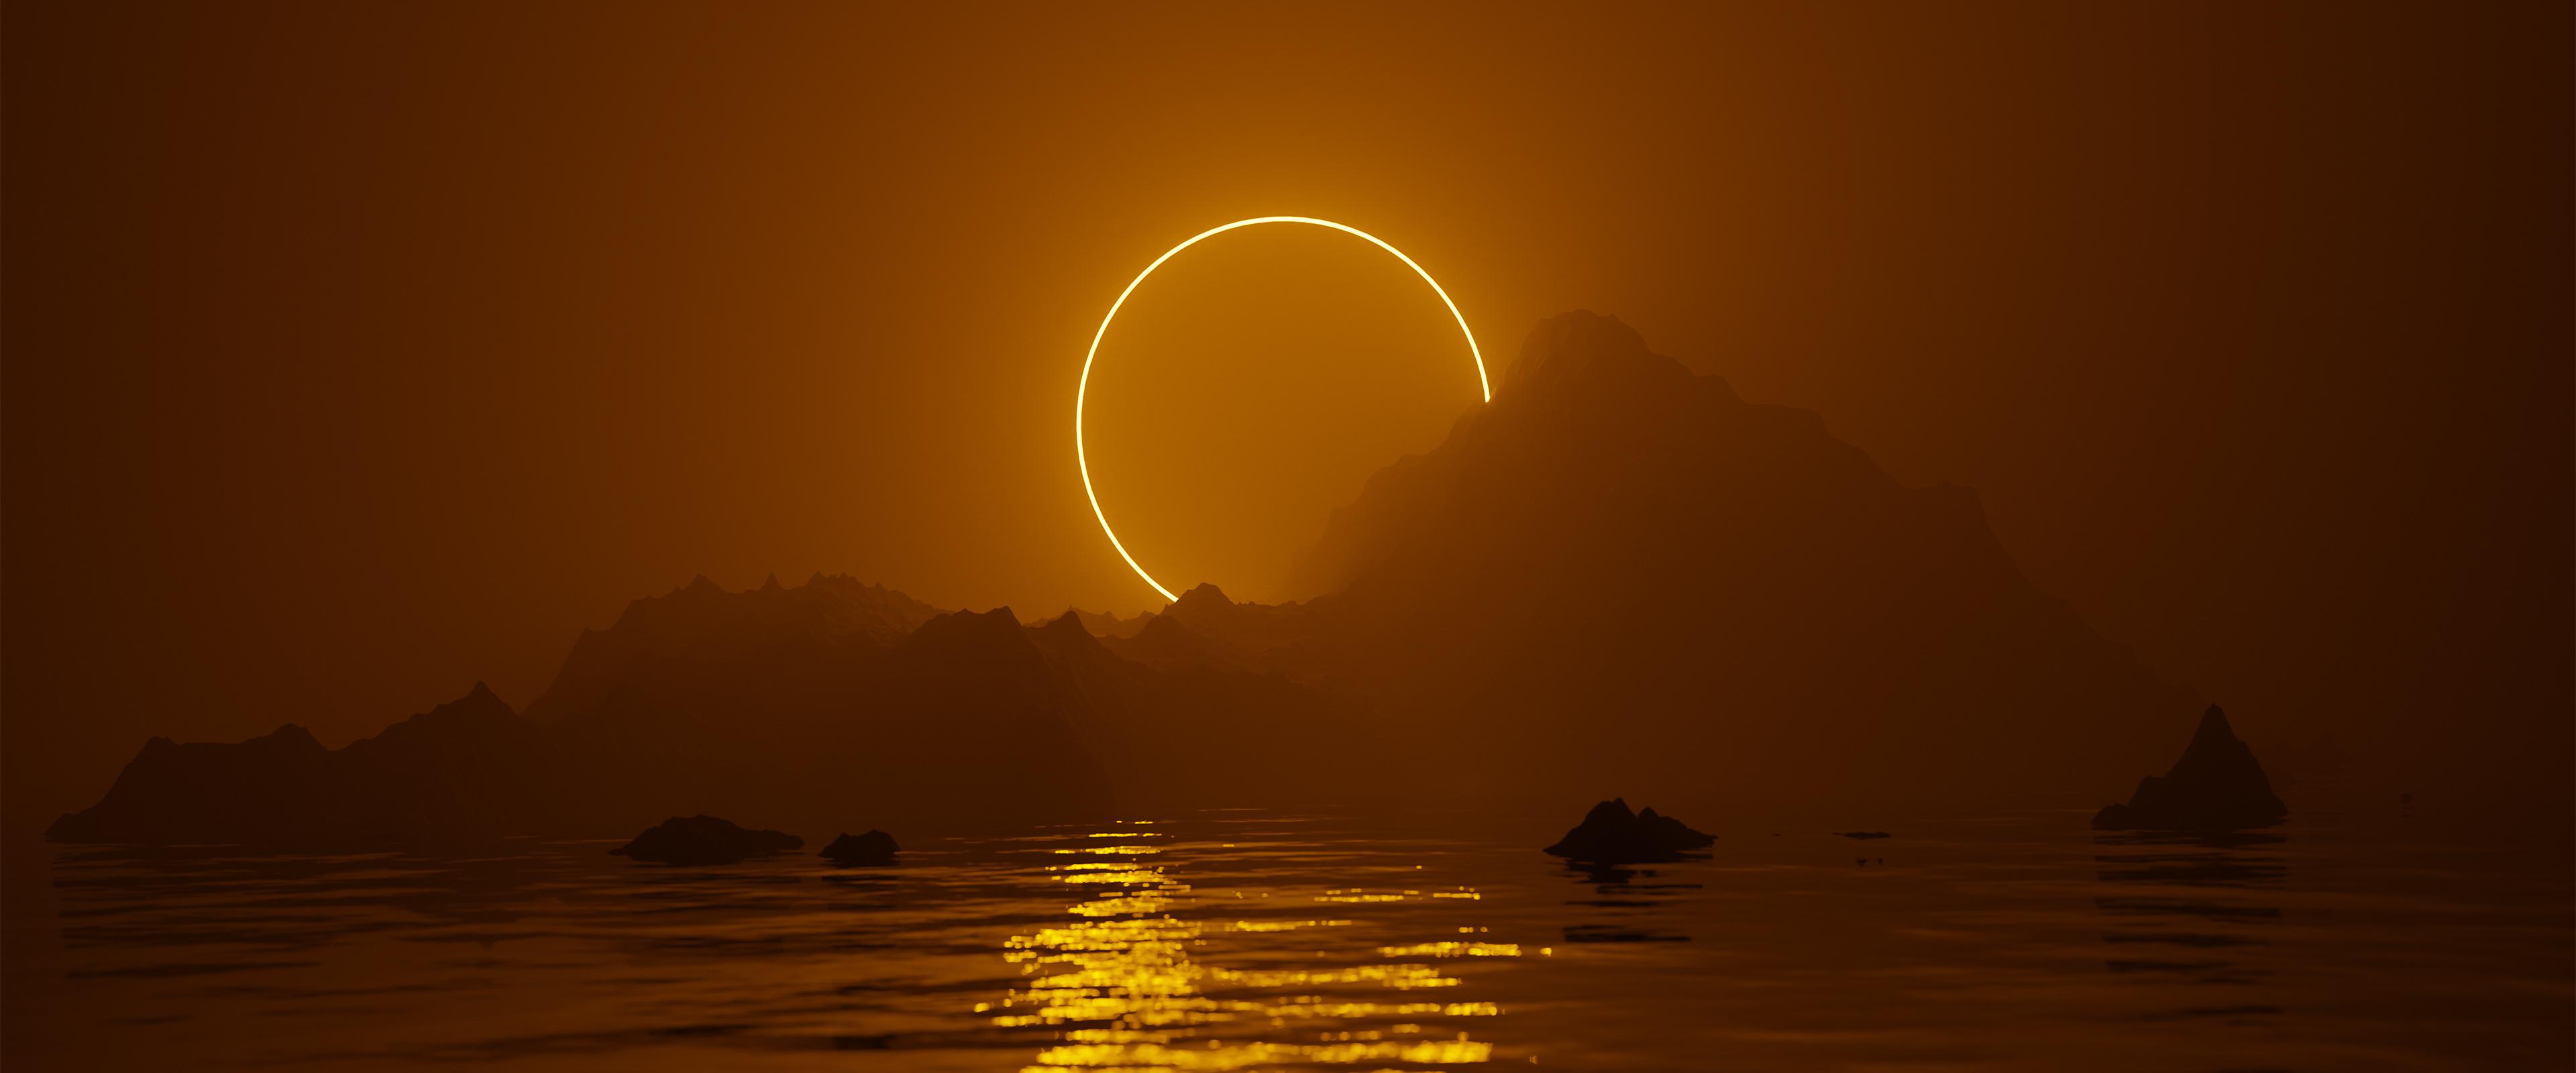 Eclipse Pictures HD  Download Free Images on Unsplash